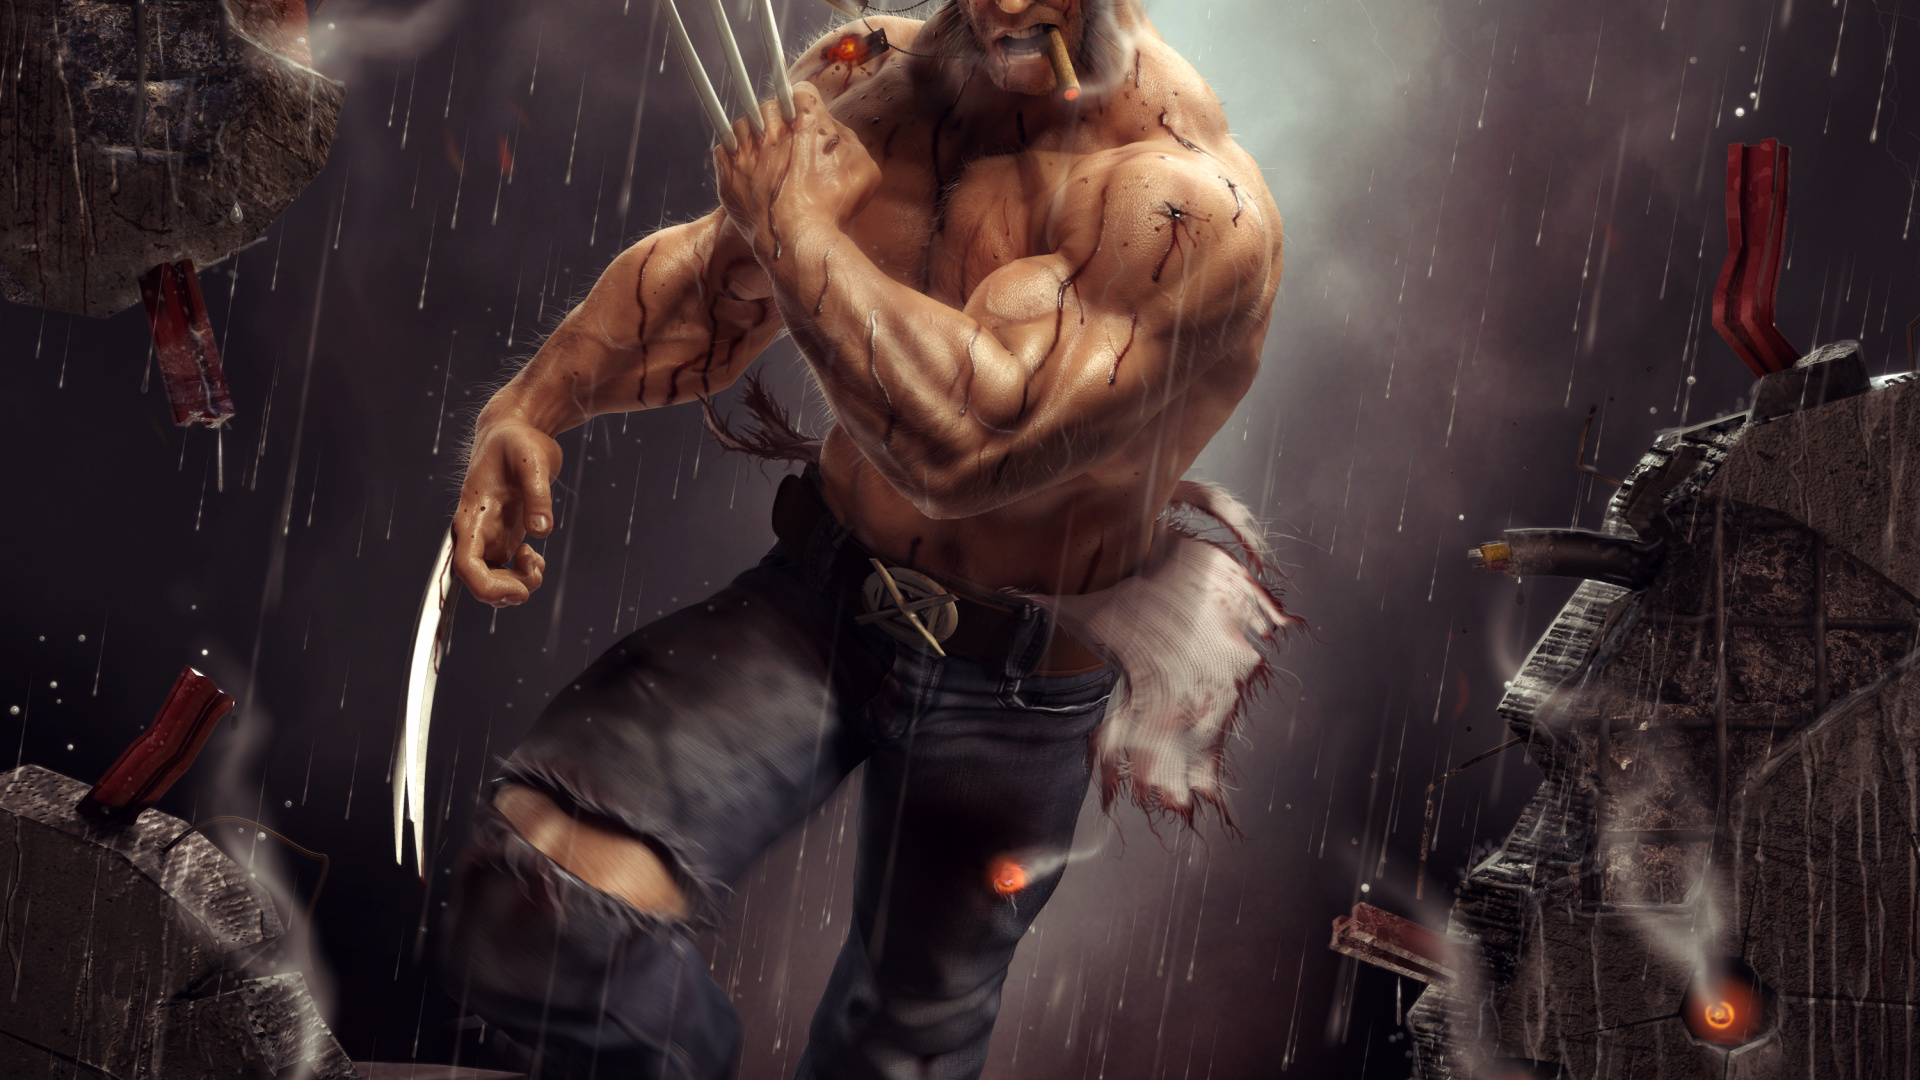 x men full hd wallpapers,action adventure game,fictional character,cg artwork,demon,pc game